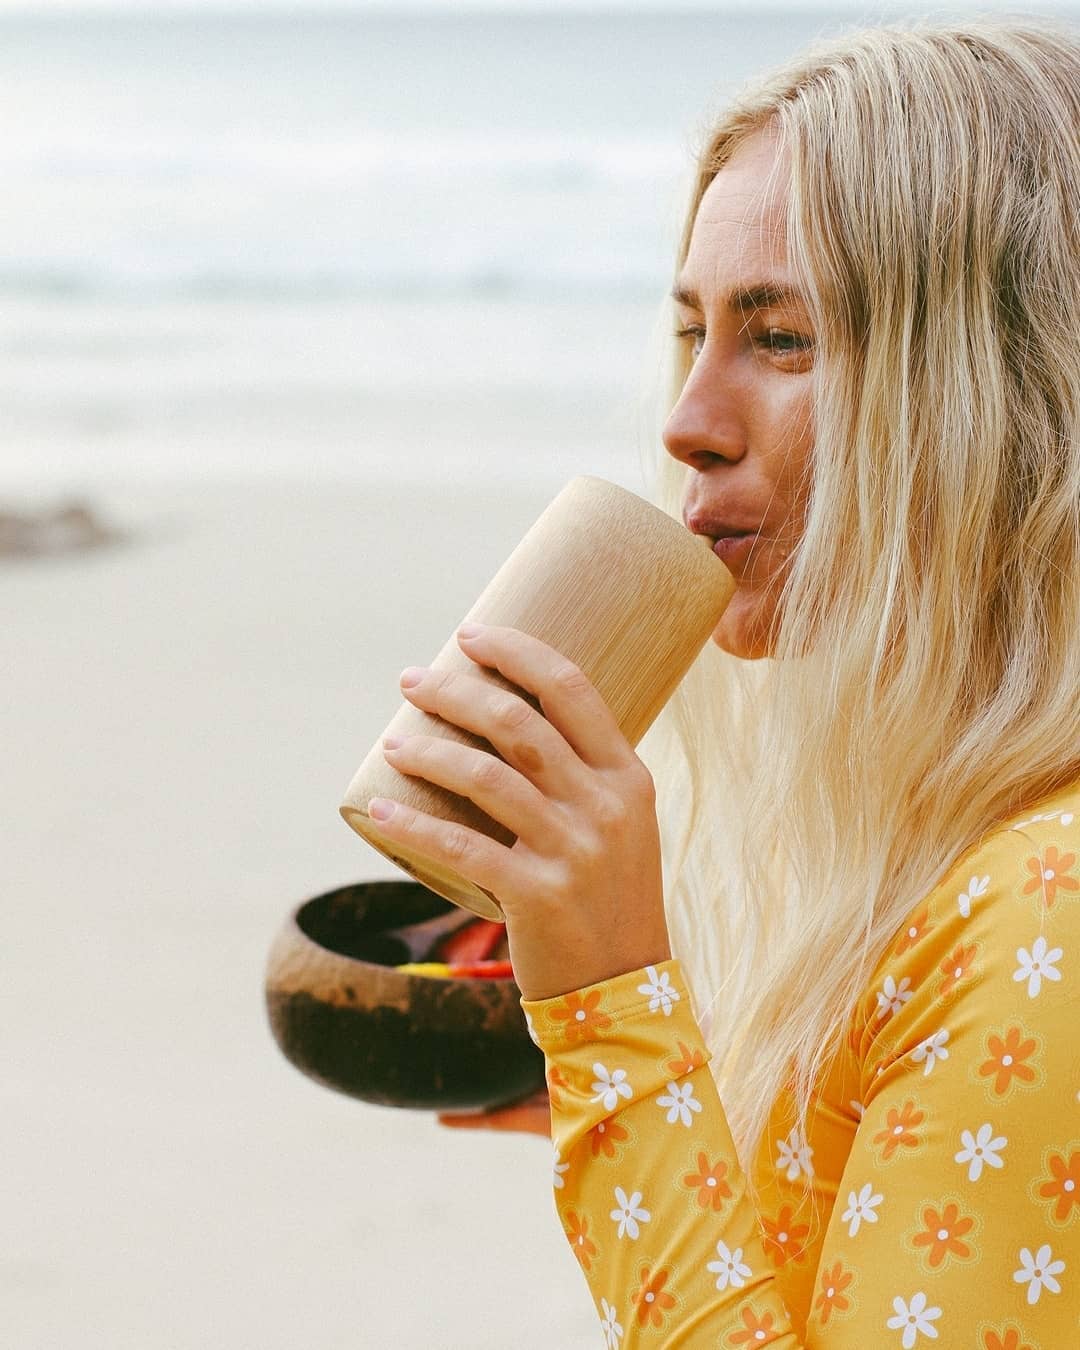 Create and sip gloriously, with these stunning sustainably sourced large wooden bamboo cups.Make your morning smoothie an event, and enjoy conscious consumption whilBamboo Cup - MediumGlorious Foods Co